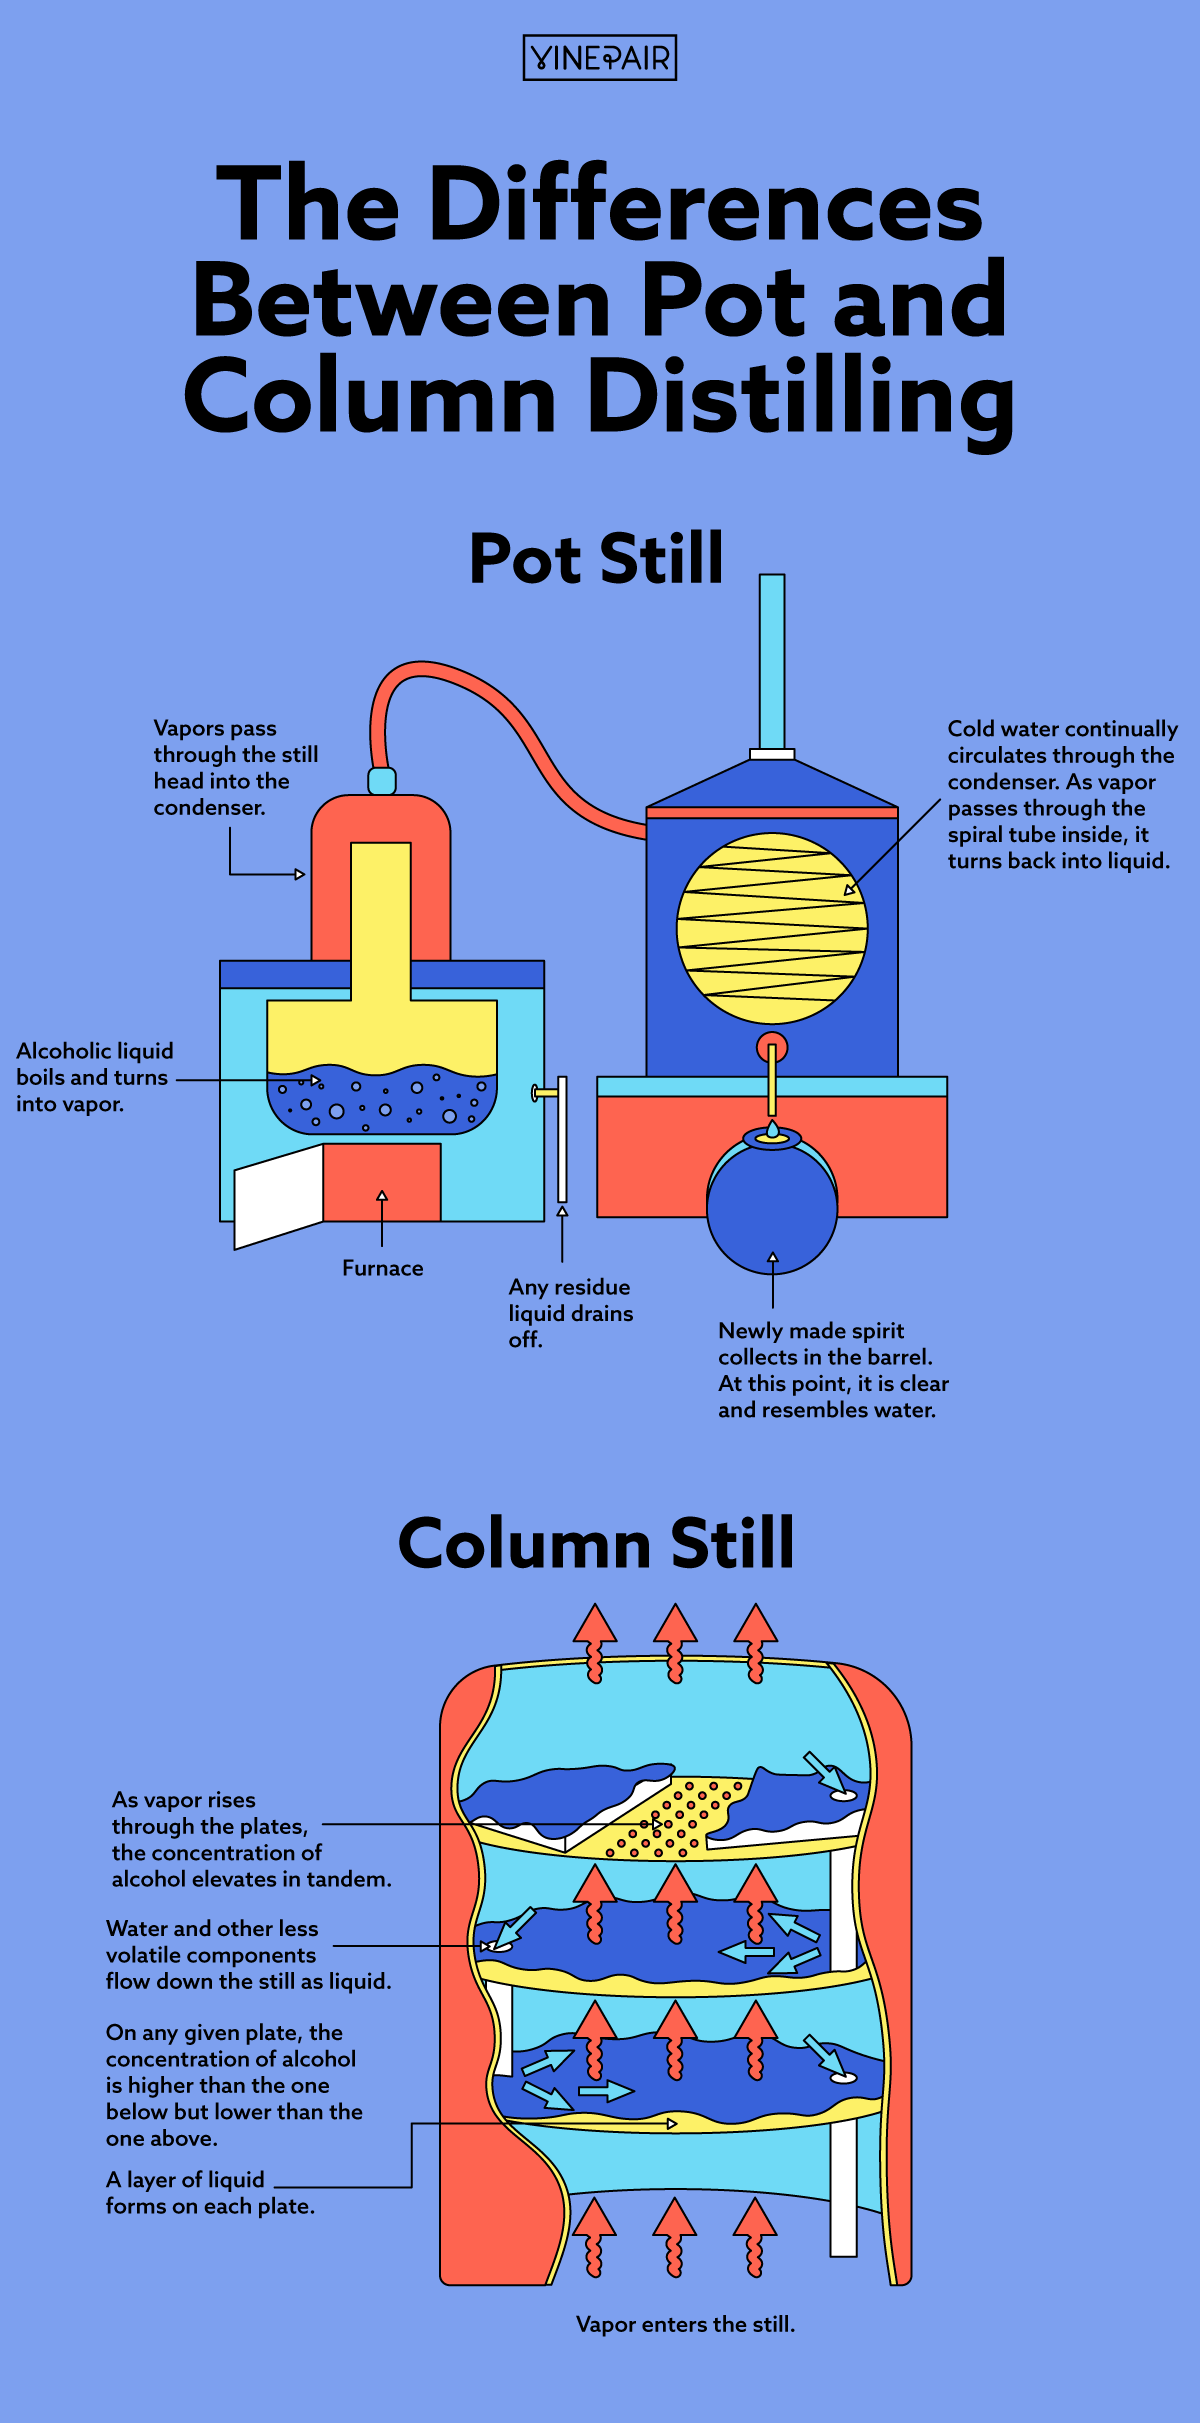 The Differences Between Pot and Column Distilling